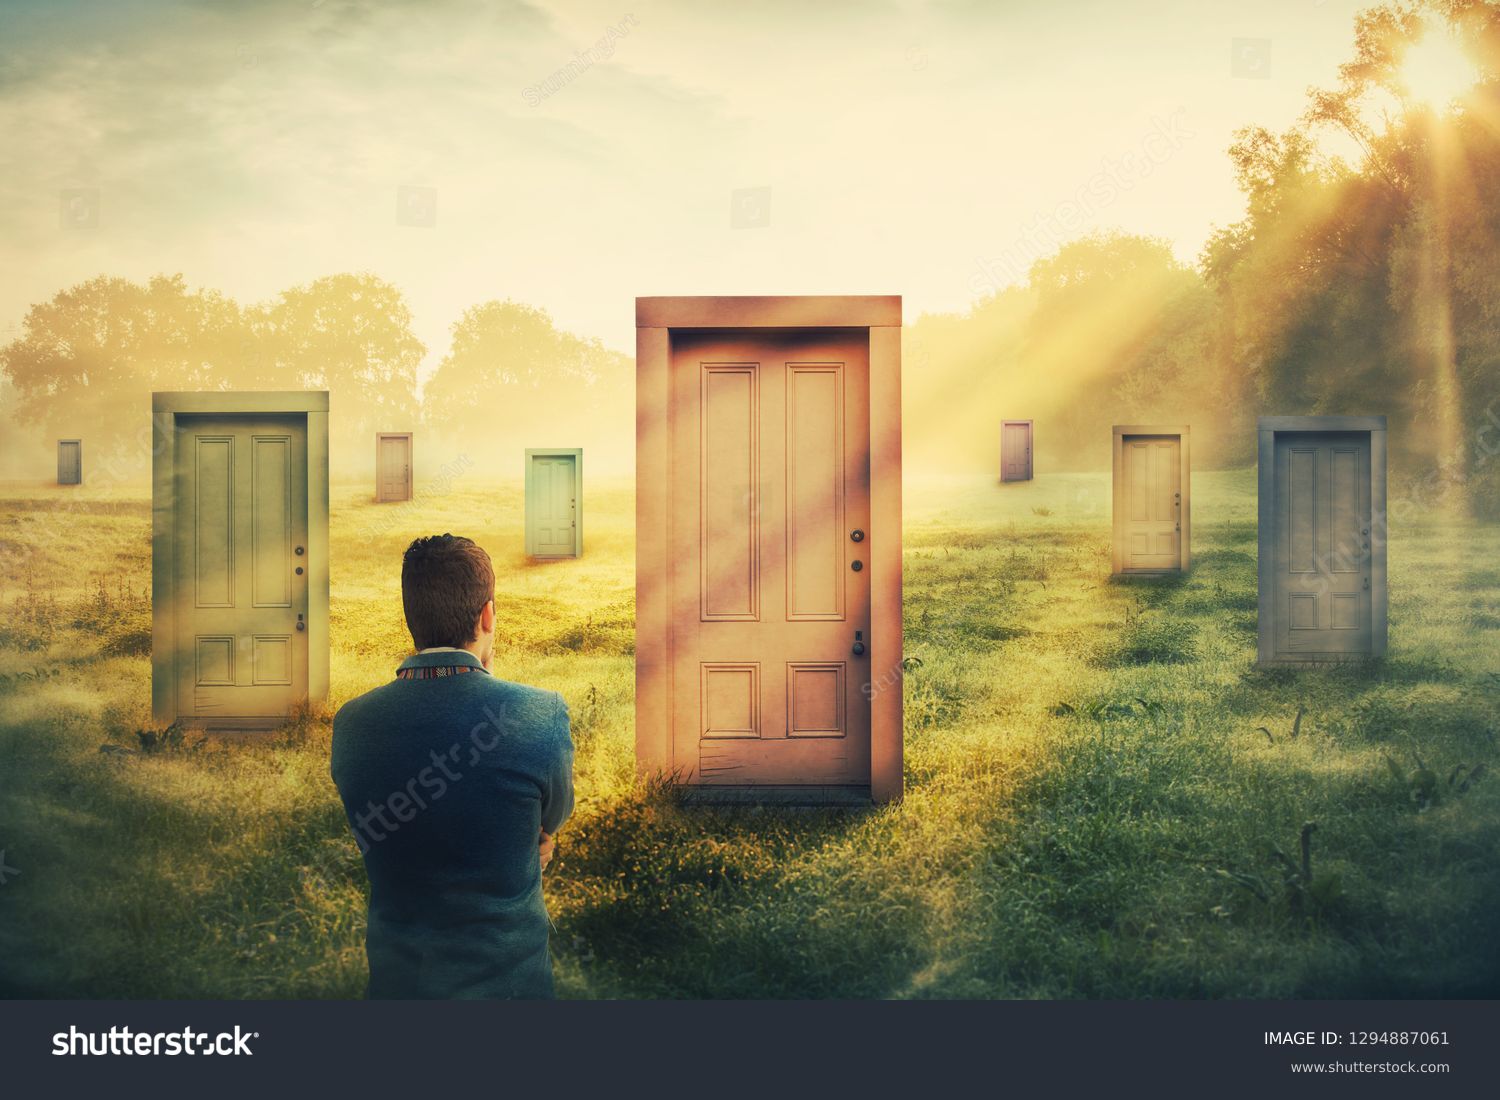 Rear view man in front of many different doors choosing one. Difficult decision, concept of important choice in life, failure or success. Ways to unknown future career development. Opportunity symbol. #1294887061